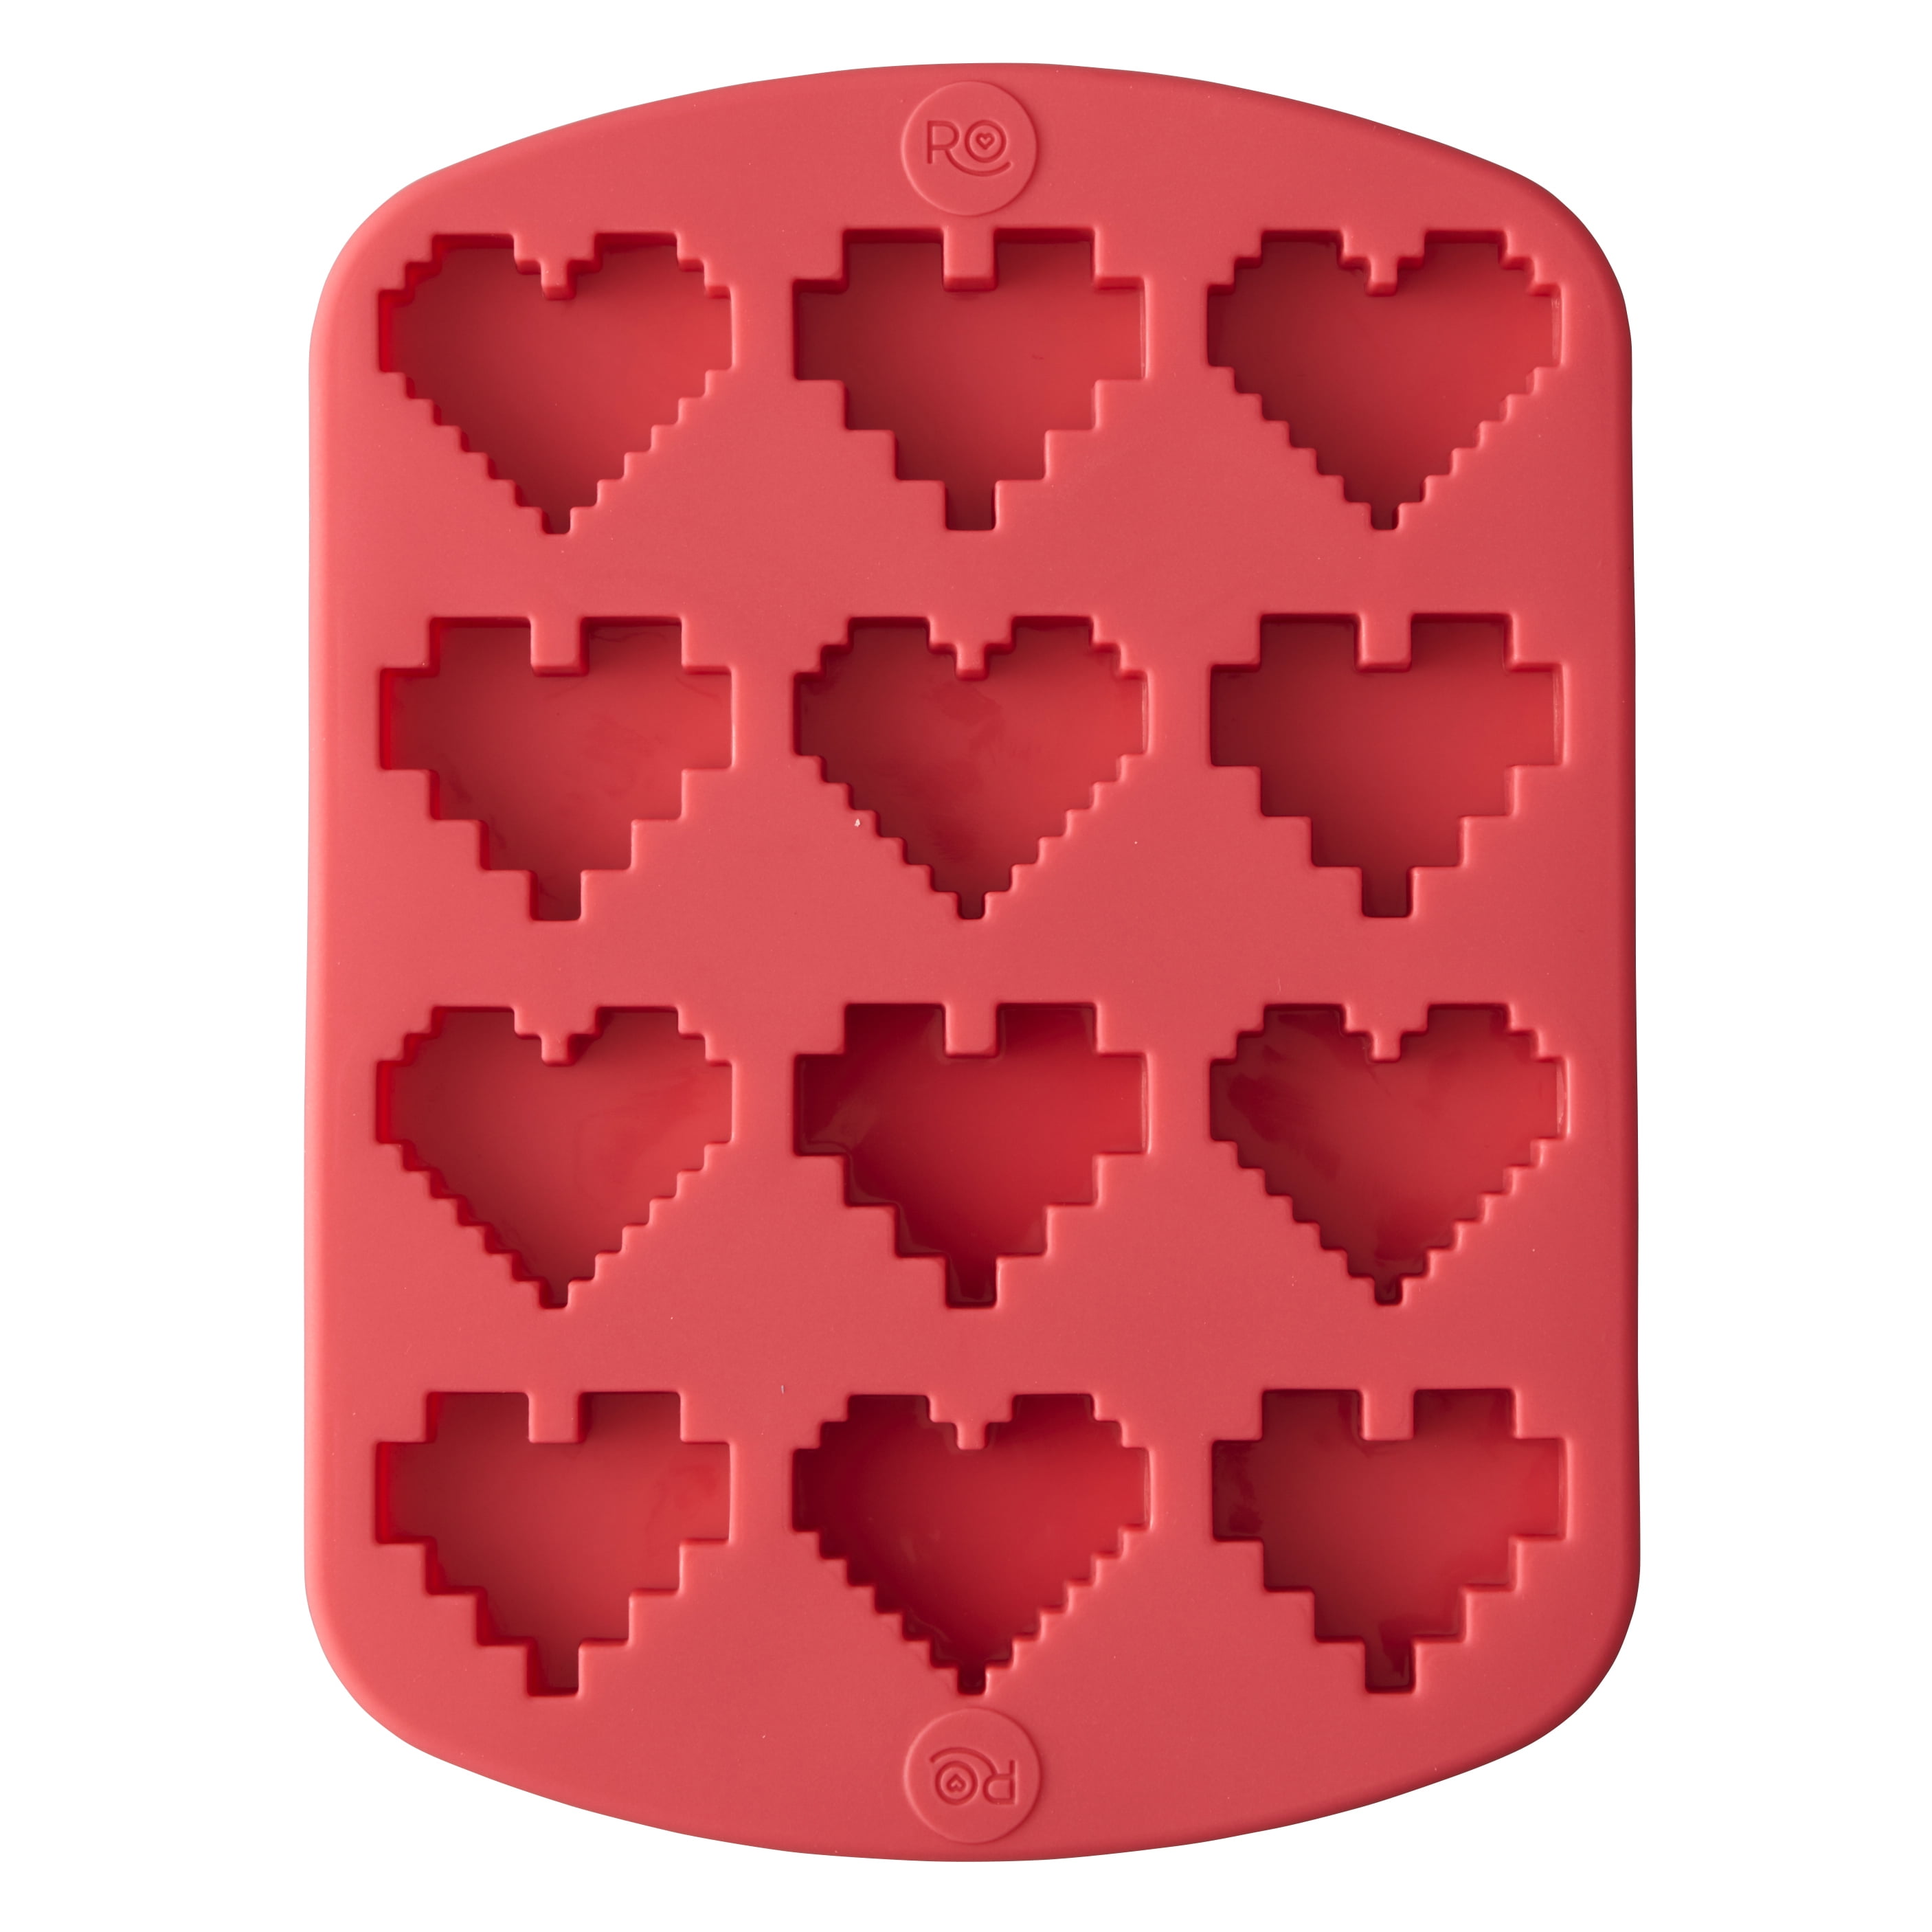 RO Hearts Silicone Candy Mold with 12 Cavities Rosanna Pansino Dishwasher Safe 